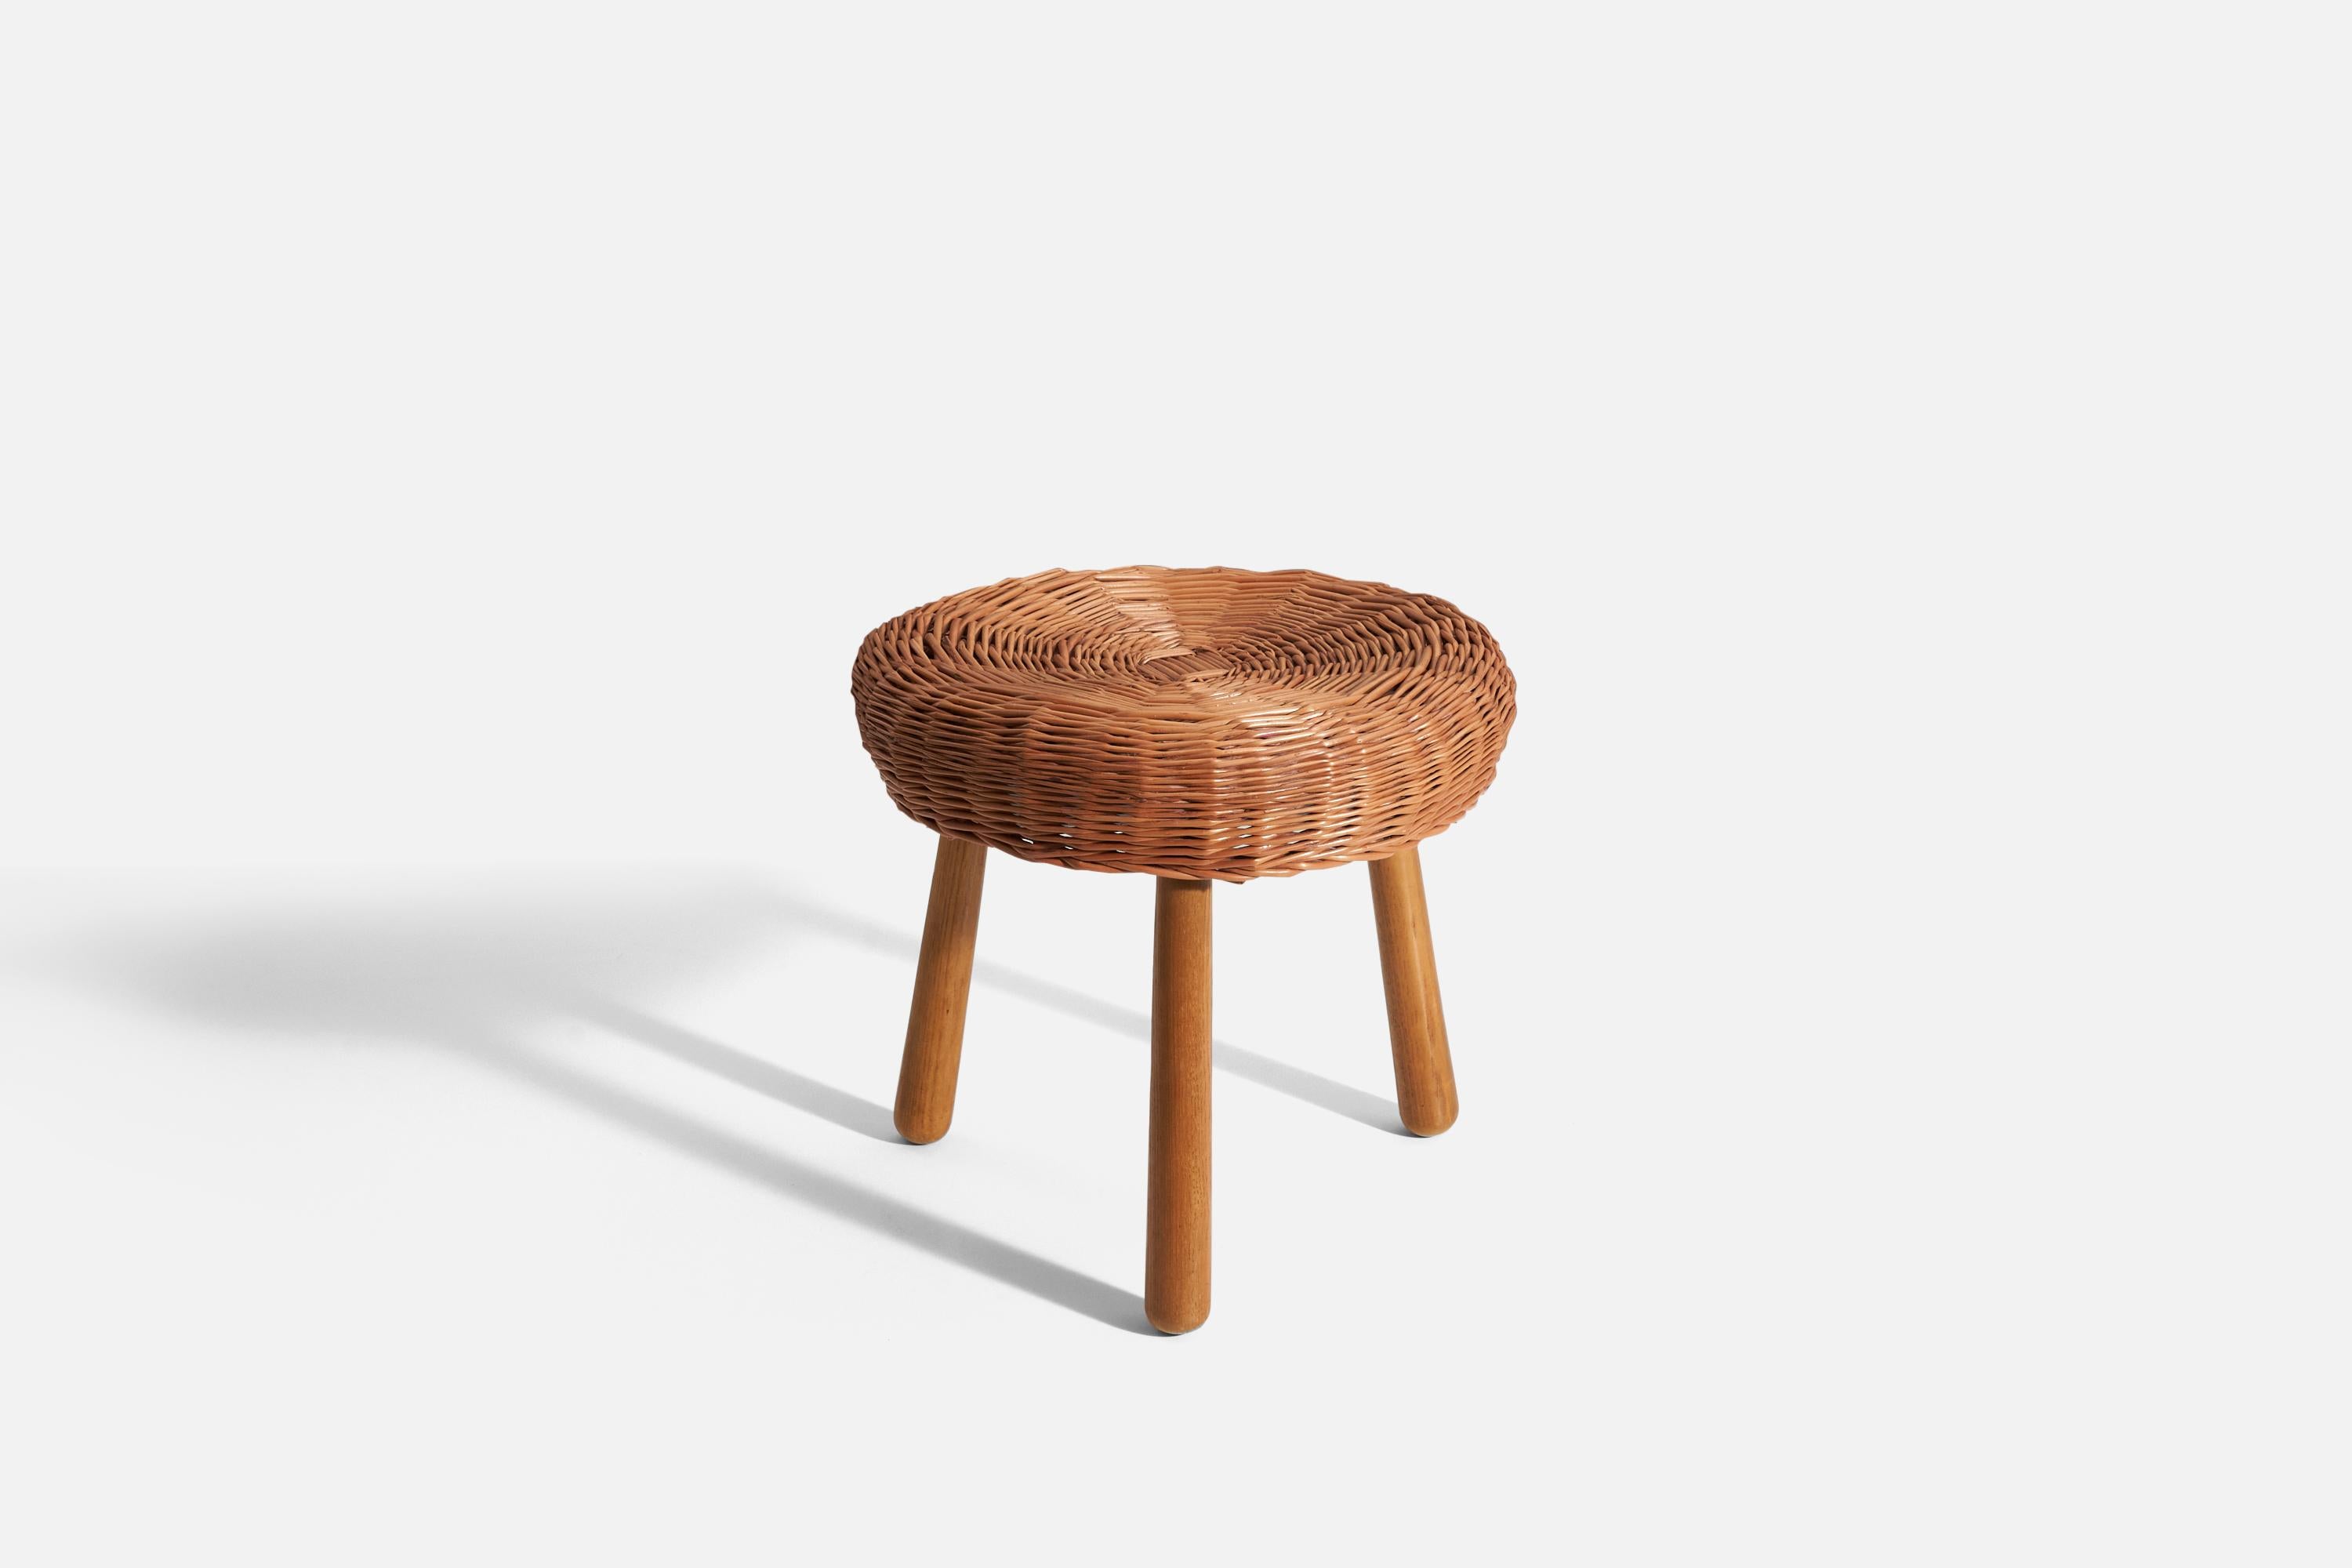 A wicker and wood stool, produced by Tony Paul, United States, 1950s.
 